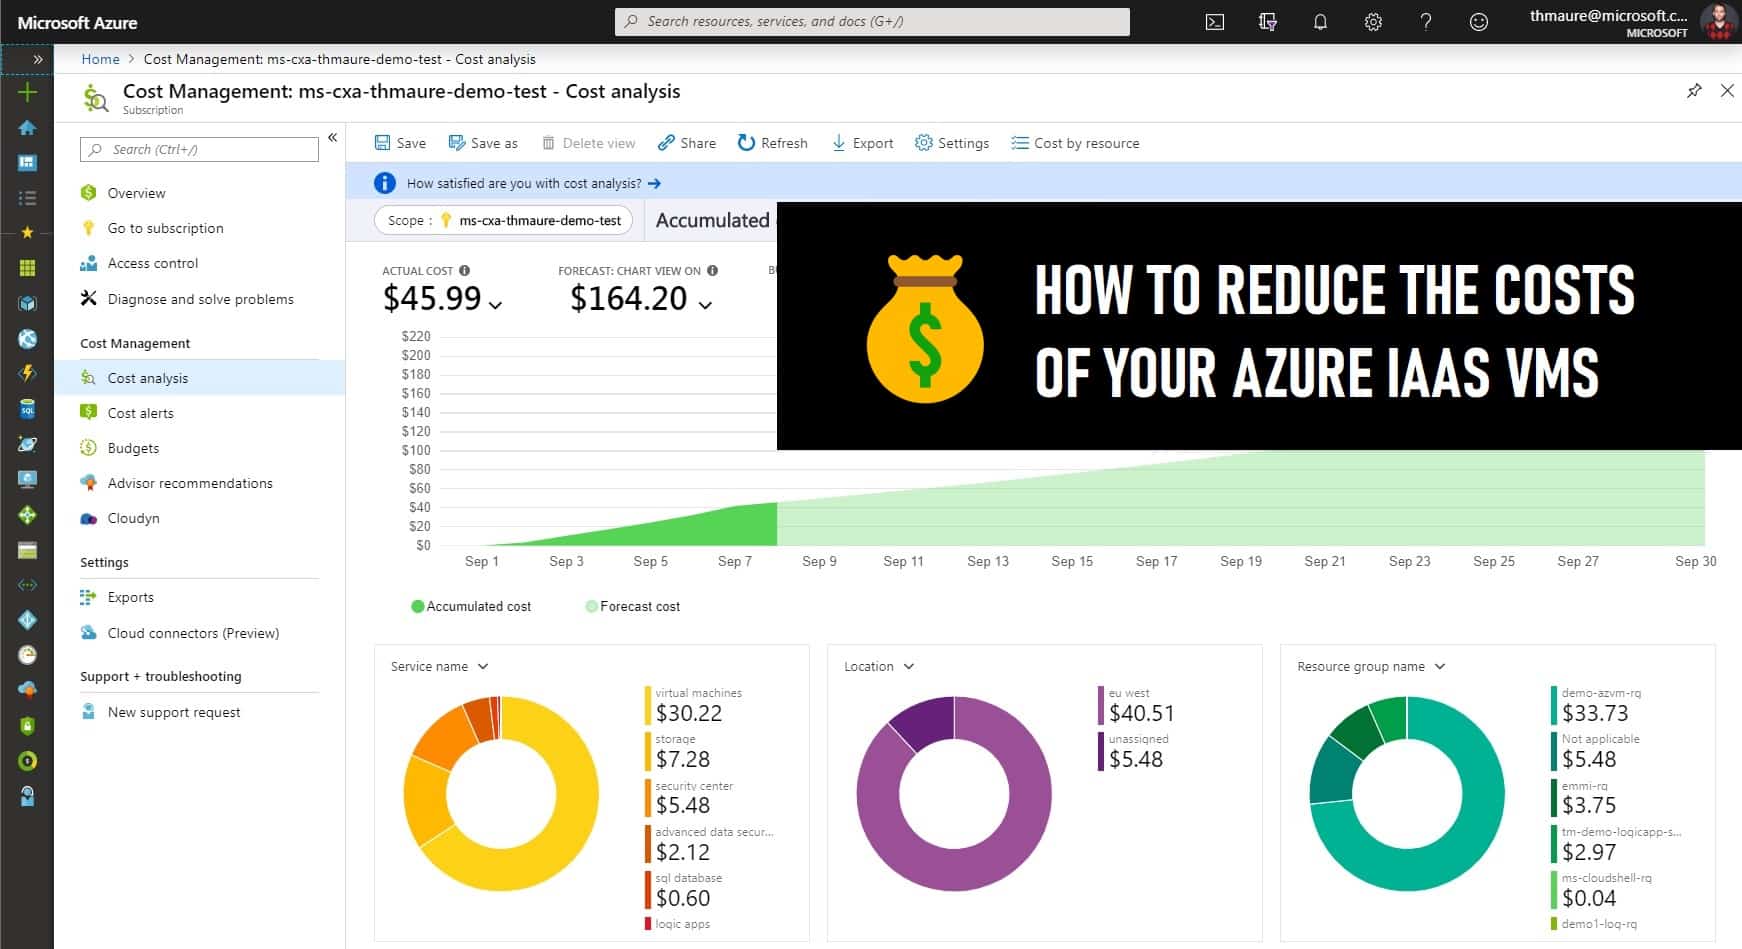 How to Reduce the Costs of your Azure IaaS VMs